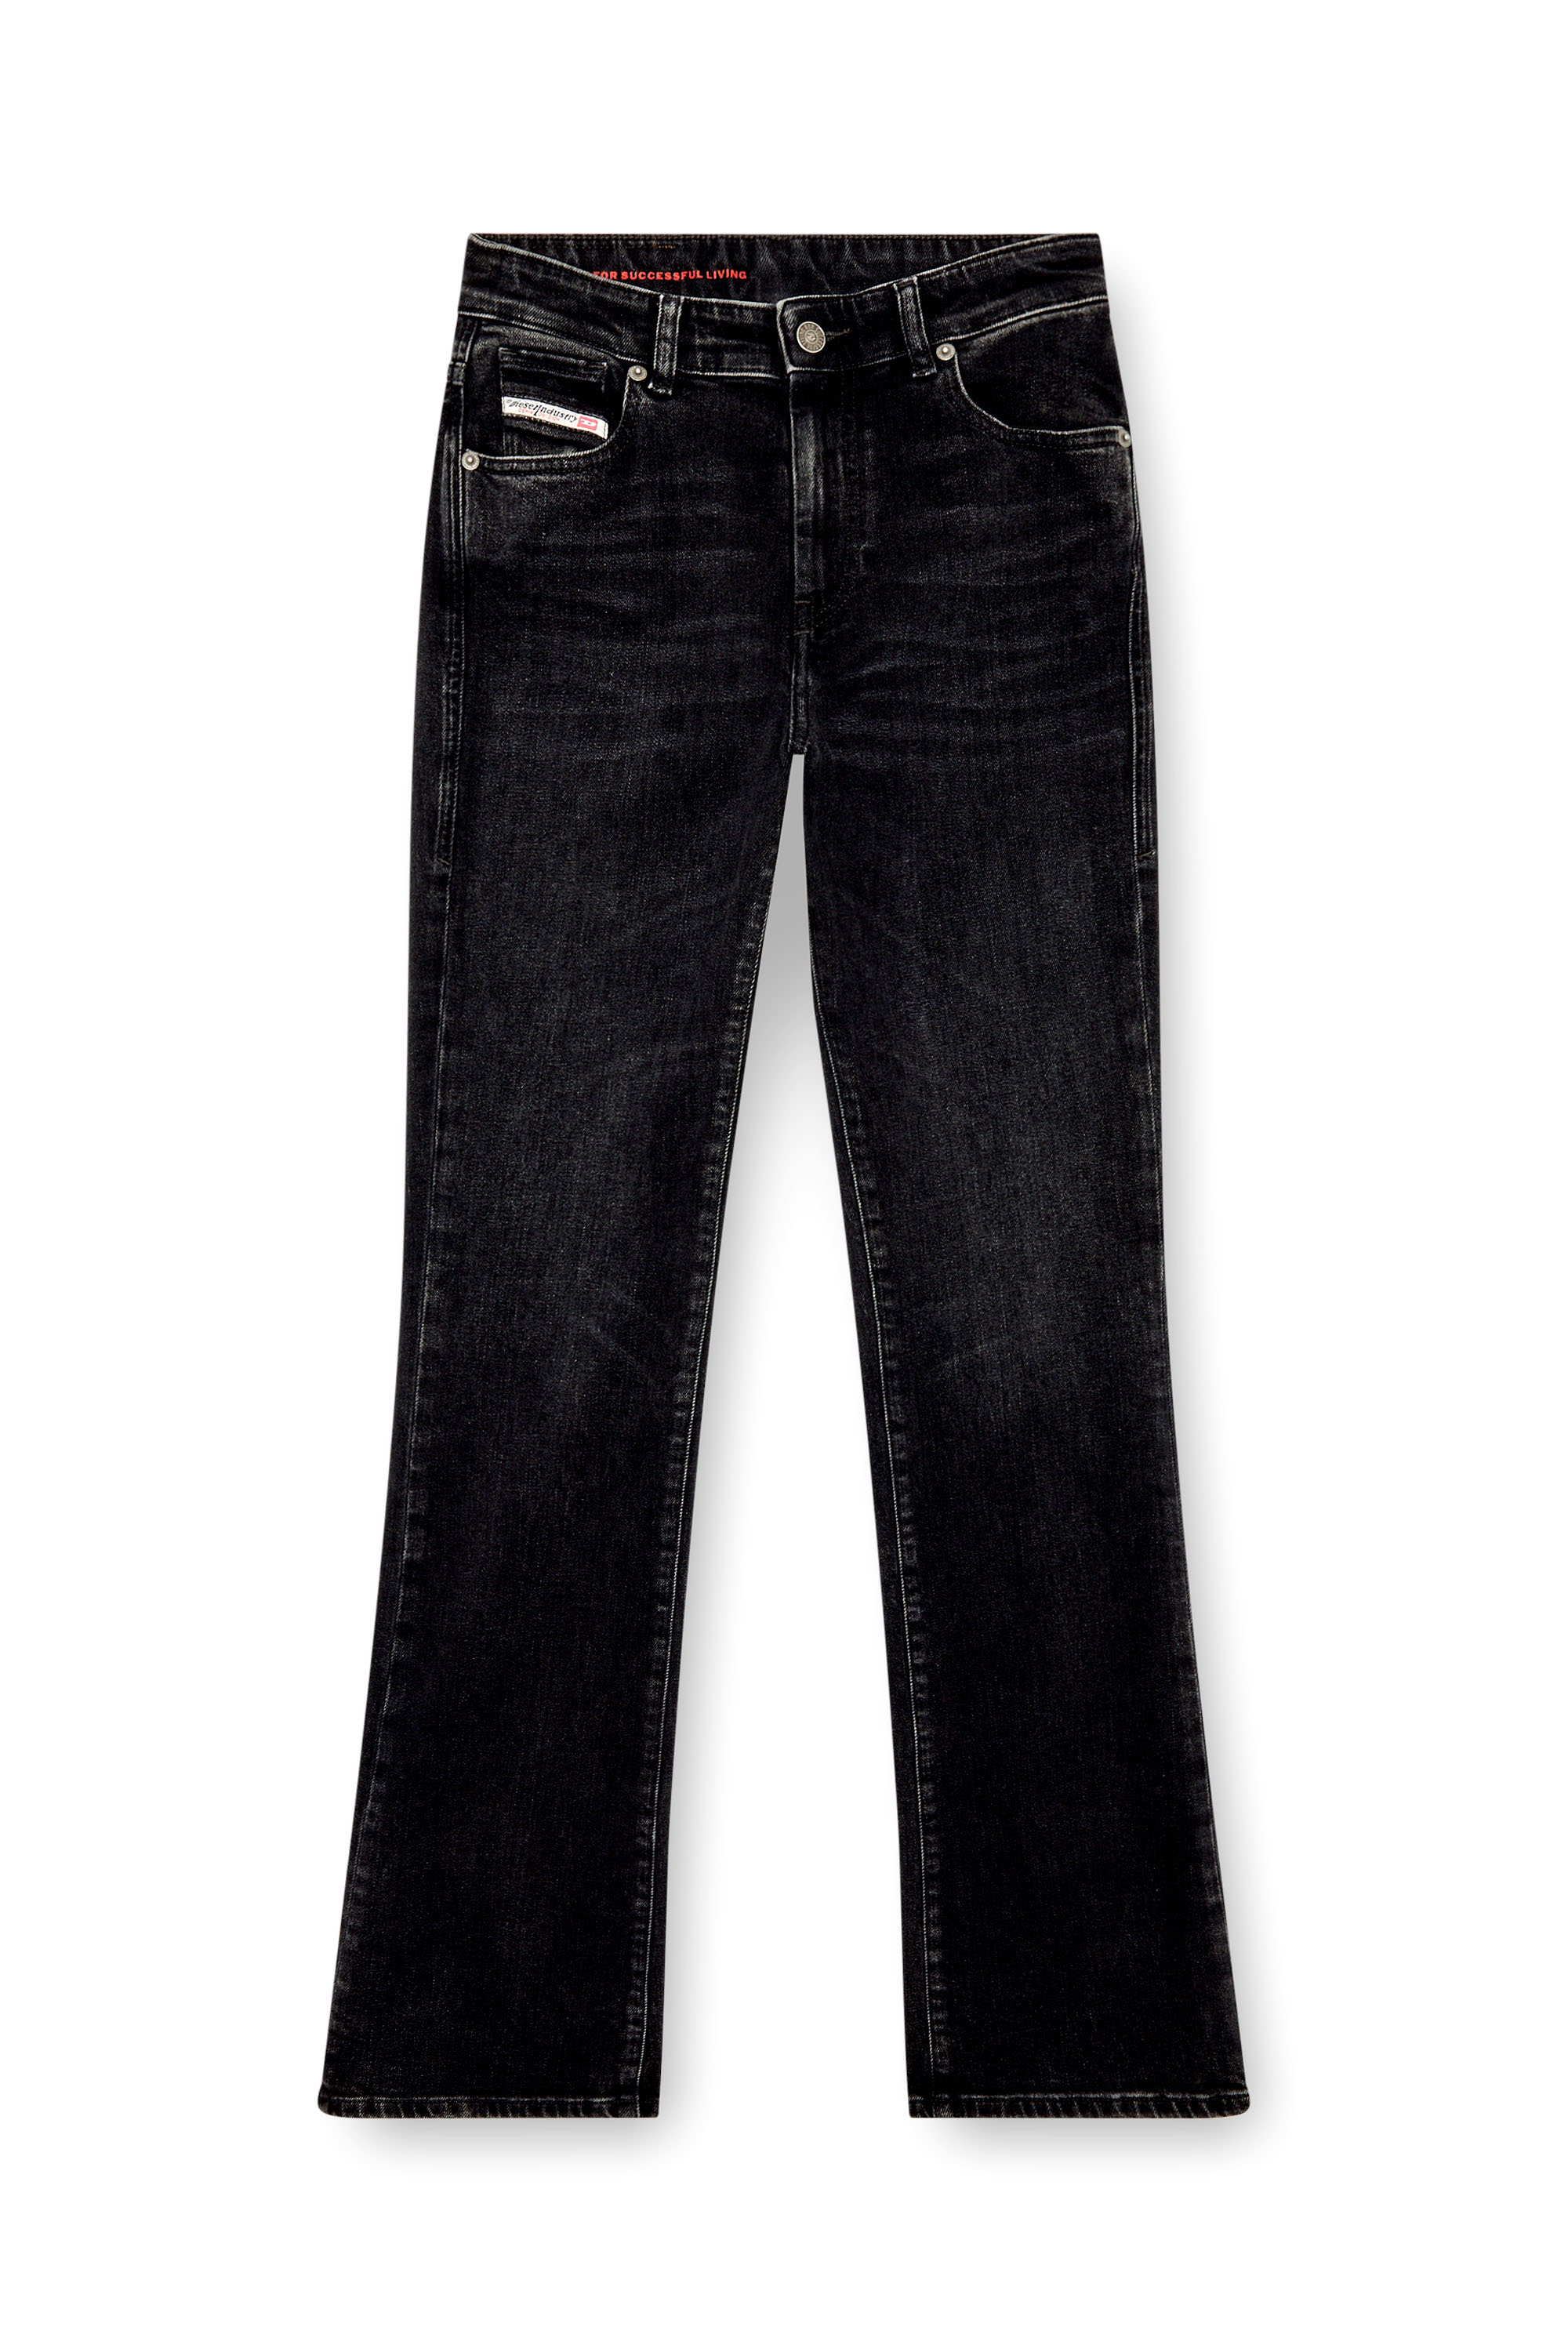 Diesel - Bootcut and Flare Jeans 2003 D-Escription 09I30, Mujer Bootcut y Flare Jeans - 2003 D-Escription in Negro - Image 5